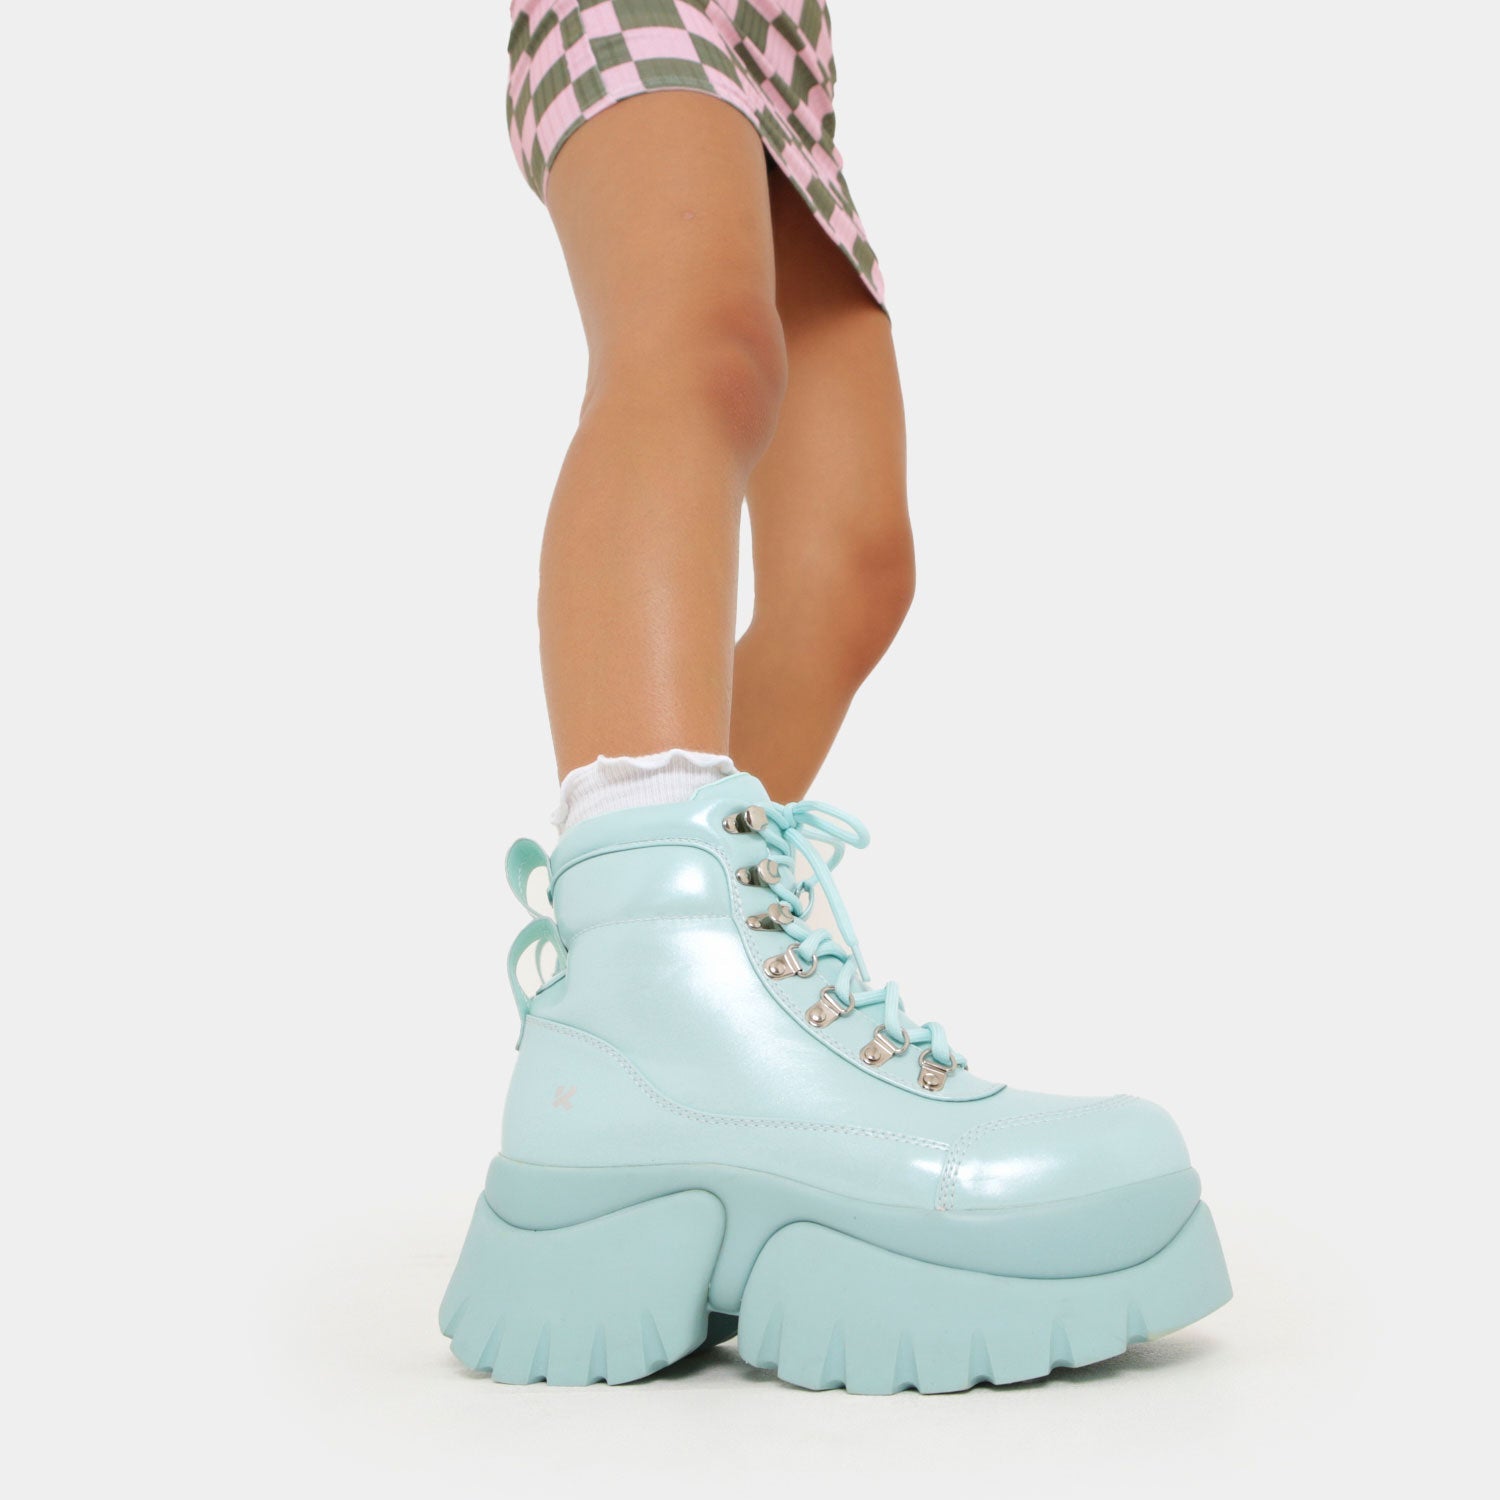 Gooey Baby Blue Platform Boots - Ankle Boots - KOI Footwear - Blue - Model Right View